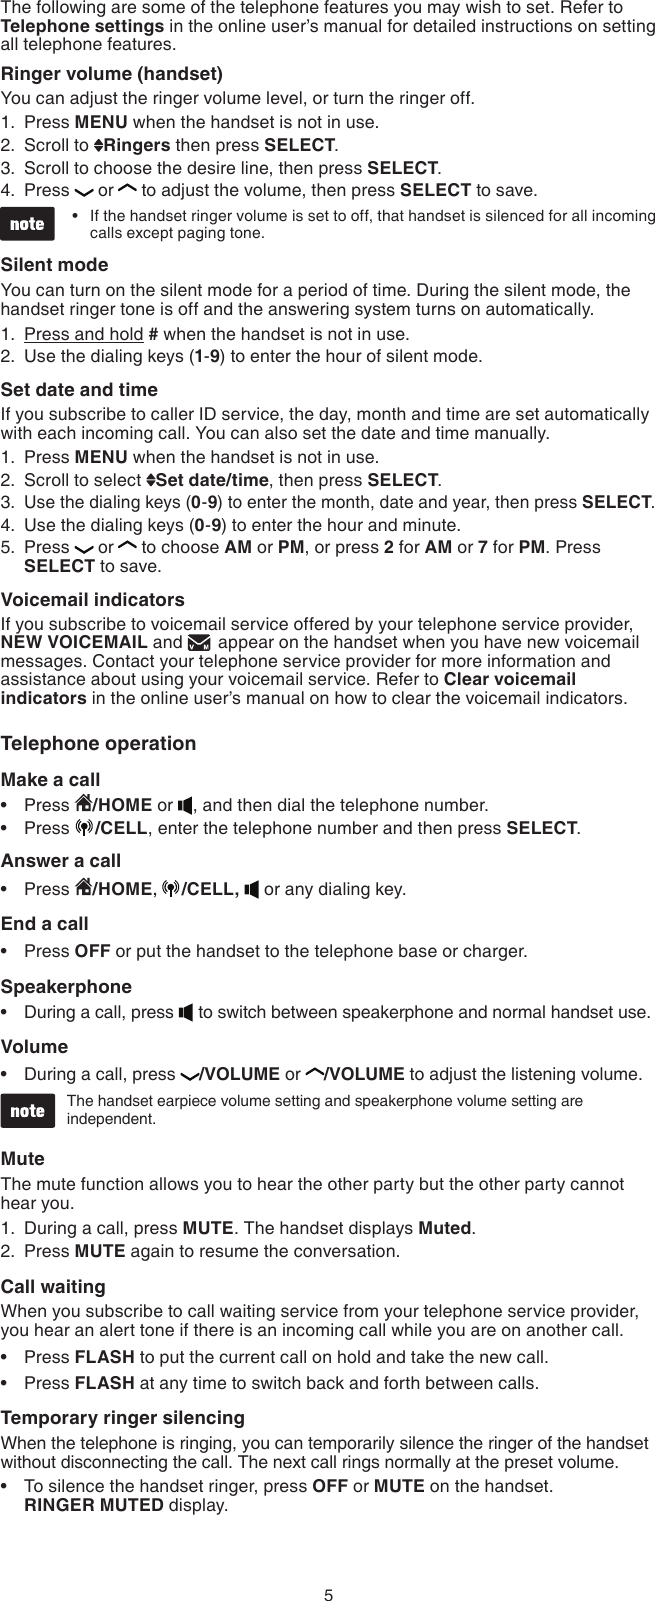 5The following are some of the telephone features you may wish to set. Refer to Telephone settings in the online user’s manual for detailed instructions on setting all telephone features.Ringer volume (handset)You can adjust the ringer volume level, or turn the ringer off.Press MENU when the handset is not in use.Scroll to  Ringers then press SELECT.Scroll to choose the desire line, then press SELECT.Press  or  to adjust the volume, then press SELECT to save.If the handset ringer volume is set to off, that handset is silenced for all incoming calls except paging tone.Silent modeYou can turn on the silent mode for a period of time. During the silent mode, the handset ringer tone is off and the answering system turns on automatically.Press and hold # when the handset is not in use.Use the dialing keys (1-9) to enter the hour of silent mode.Set date and timeIf you subscribe to caller ID service, the day, month and time are set automatically with each incoming call. You can also set the date and time manually.Press MENU when the handset is not in use.Scroll to select  Set date/time, then press SELECT.Use the dialing keys (0-9) to enter the month, date and year, then press SELECT.Use the dialing keys (0-9) to enter the hour and minute.Press  or  to choose AM or PM, or press 2 for AM or 7 for PM. Press SELECT to save. Voicemail indicatorsIf you subscribe to voicemail service offered by your telephone service provider, NEW VOICEMAIL and   appear on the handset when you have new voicemail messages. Contact your telephone service provider for more information and assistance about using your voicemail service. Refer to Clear voicemail indicators in the online user’s manual on how to clear the voicemail indicators.Telephone operationMake a callPress  /HOME or  , and then dial the telephone number.Press  /CELL, enter the telephone number and then press SELECT.Answer a callPress  /HOME,  /CELL,   or any dialing key.End a callPress OFF or put the handset to the telephone base or charger.SpeakerphoneDuring a call, press   to switch between speakerphone and normal handset use.VolumeDuring a call, press  /VOLUME or  /VOLUME to adjust the listening volume.The handset earpiece volume setting and speakerphone volume setting are independent.MuteThe mute function allows you to hear the other party but the other party cannot hear you.During a call, press MUTE. The handset displays Muted.Press MUTE again to resume the conversation.Call waitingWhen you subscribe to call waiting service from your telephone service provider,  you hear an alert tone if there is an incoming call while you are on another call. Press FLASH to put the current call on hold and take the new call.Press FLASH at any time to switch back and forth between calls.Temporary ringer silencingWhen the telephone is ringing, you can temporarily silence the ringer of the handset without disconnecting the call. The next call rings normally at the preset volume.To silence the handset ringer, press OFF or MUTE on the handset.  RINGER MUTED display.1.2.3.4.•1.2.1.2.3.4.5.••••••1.2.•••